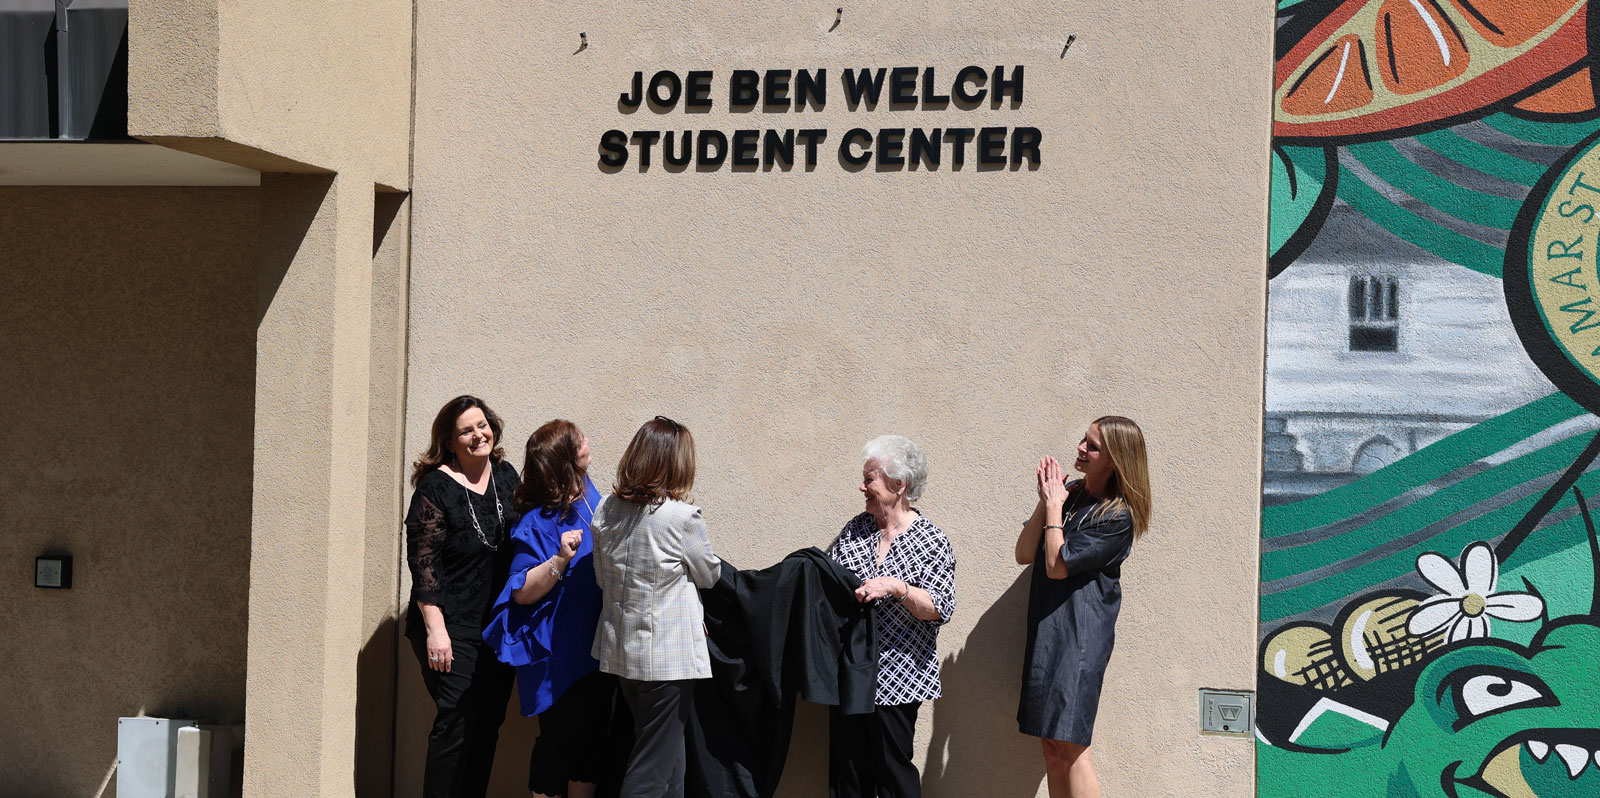 Family of Joe Ben Welch Reveal Name on Building